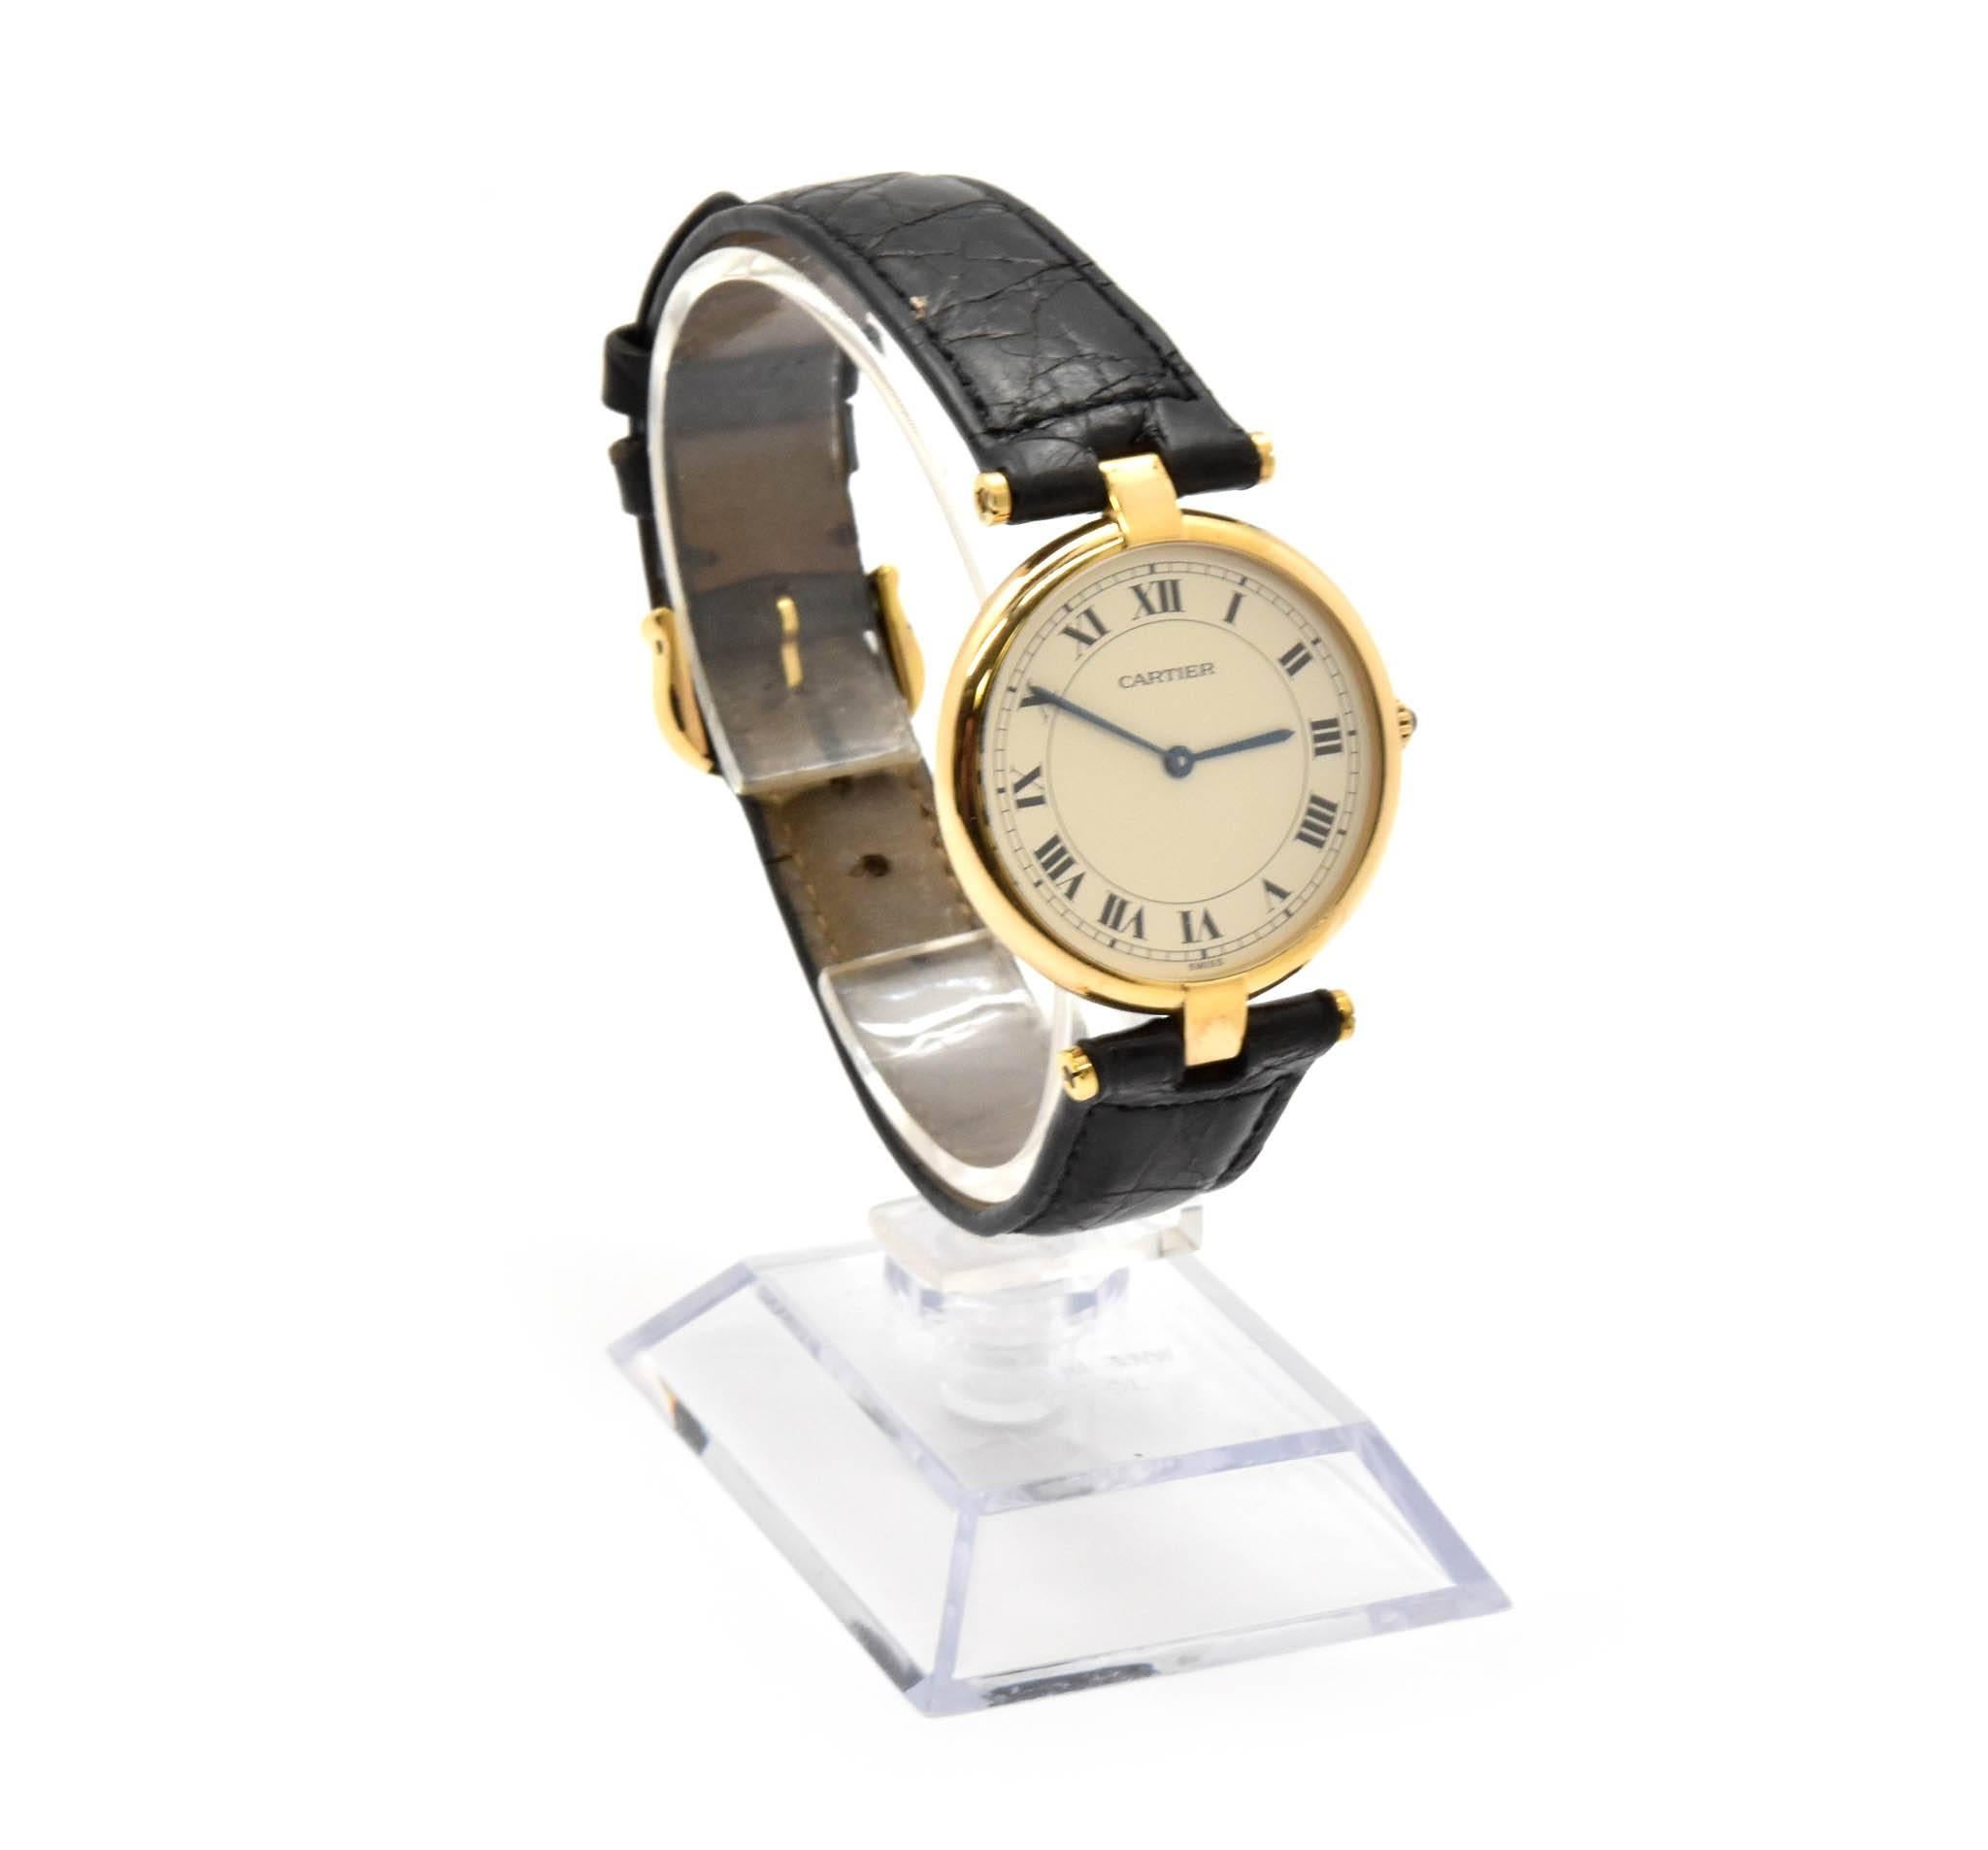 Movement: quartz
Function: hours, minutes
Case: 30mm yellow 18k yellow gold case, pull/push spinel crown, 18k yellow gold t-bar lugs, protective crystal
Band: black croc strap with gold buckle
Dial: original Cartier white matte roman numerals dial,